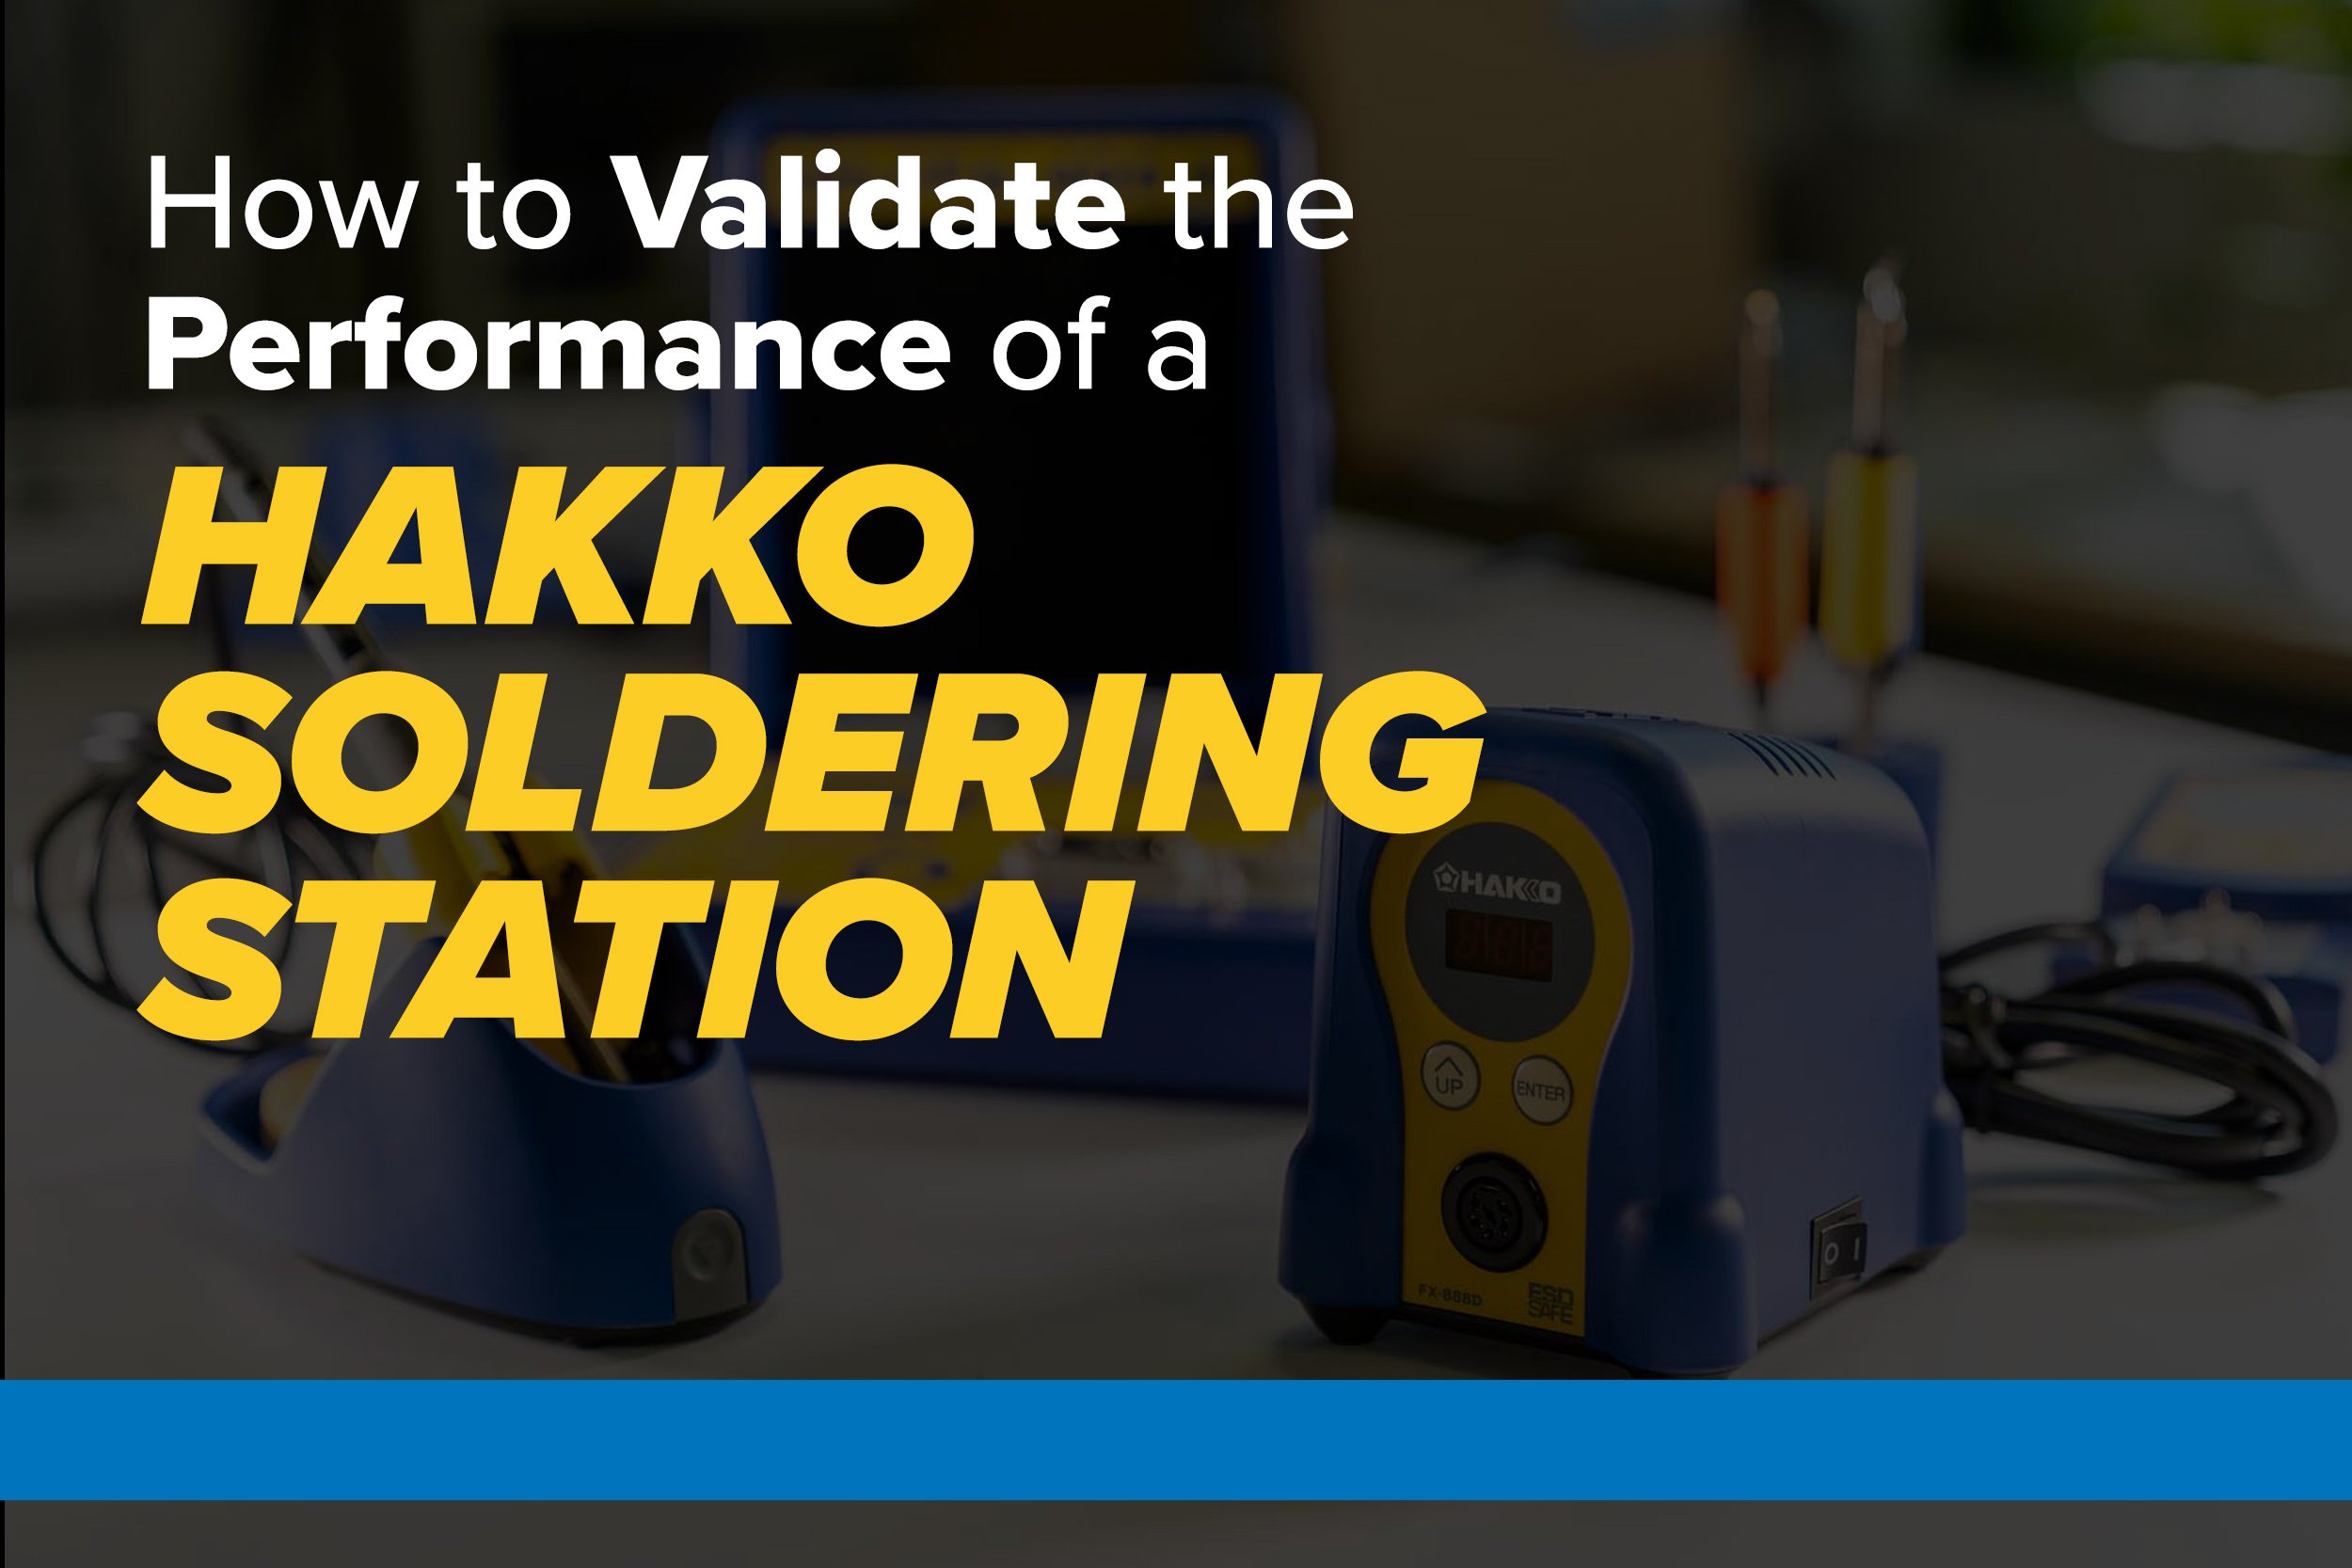 How to Validate the Performance of a Hakko Soldering Station